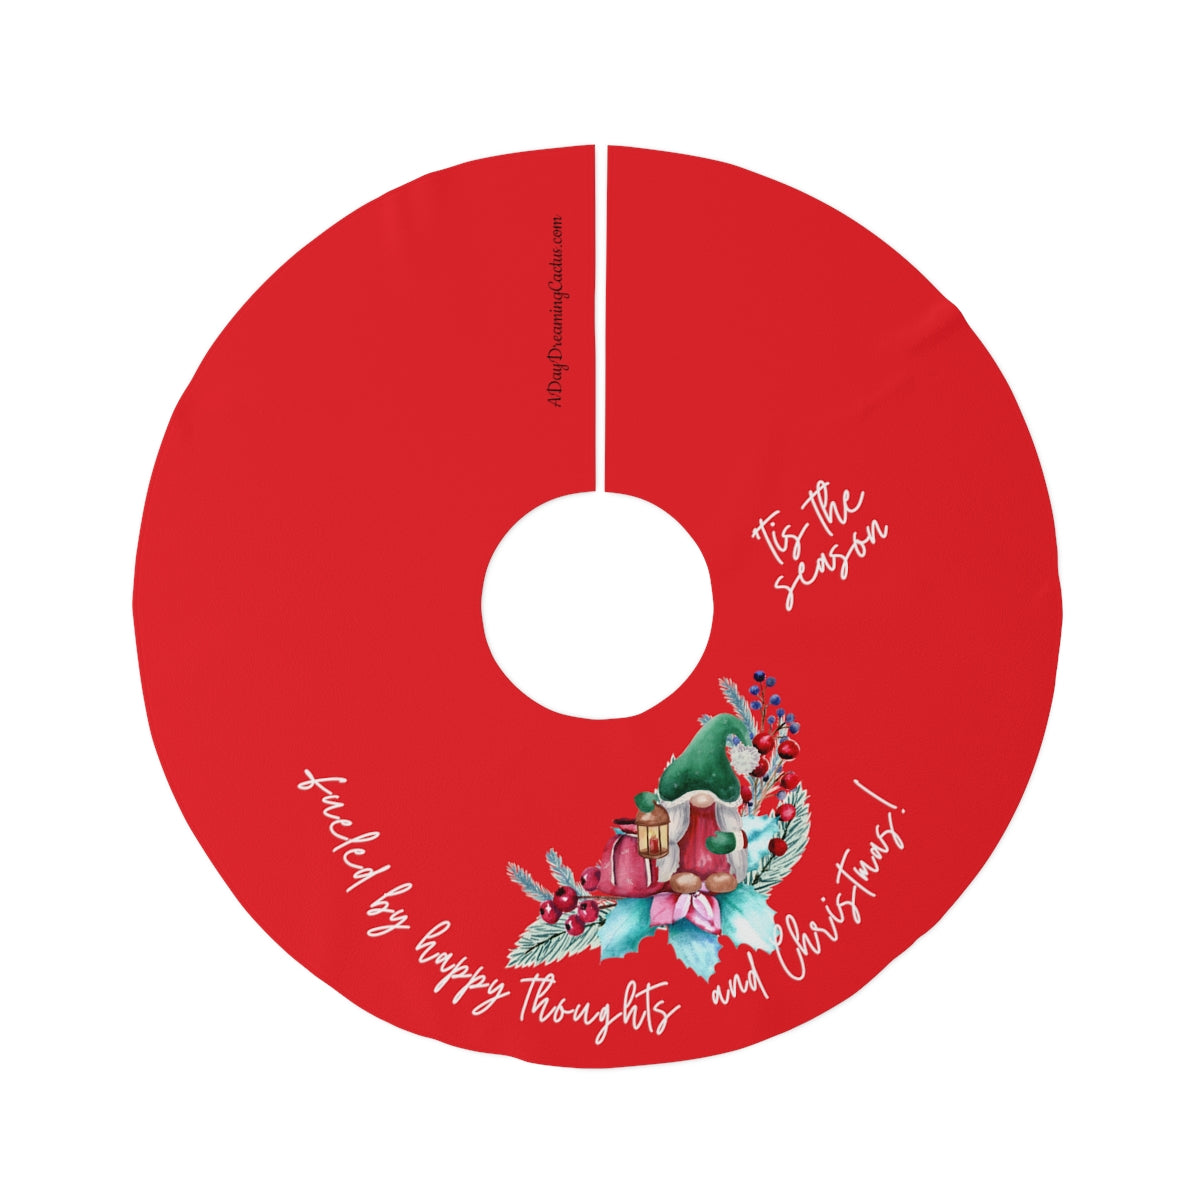 Red Fueled by Happy Thoughts & Christmas with Christmas Gnome ~ Christmas Holiday Round Tree Skirt